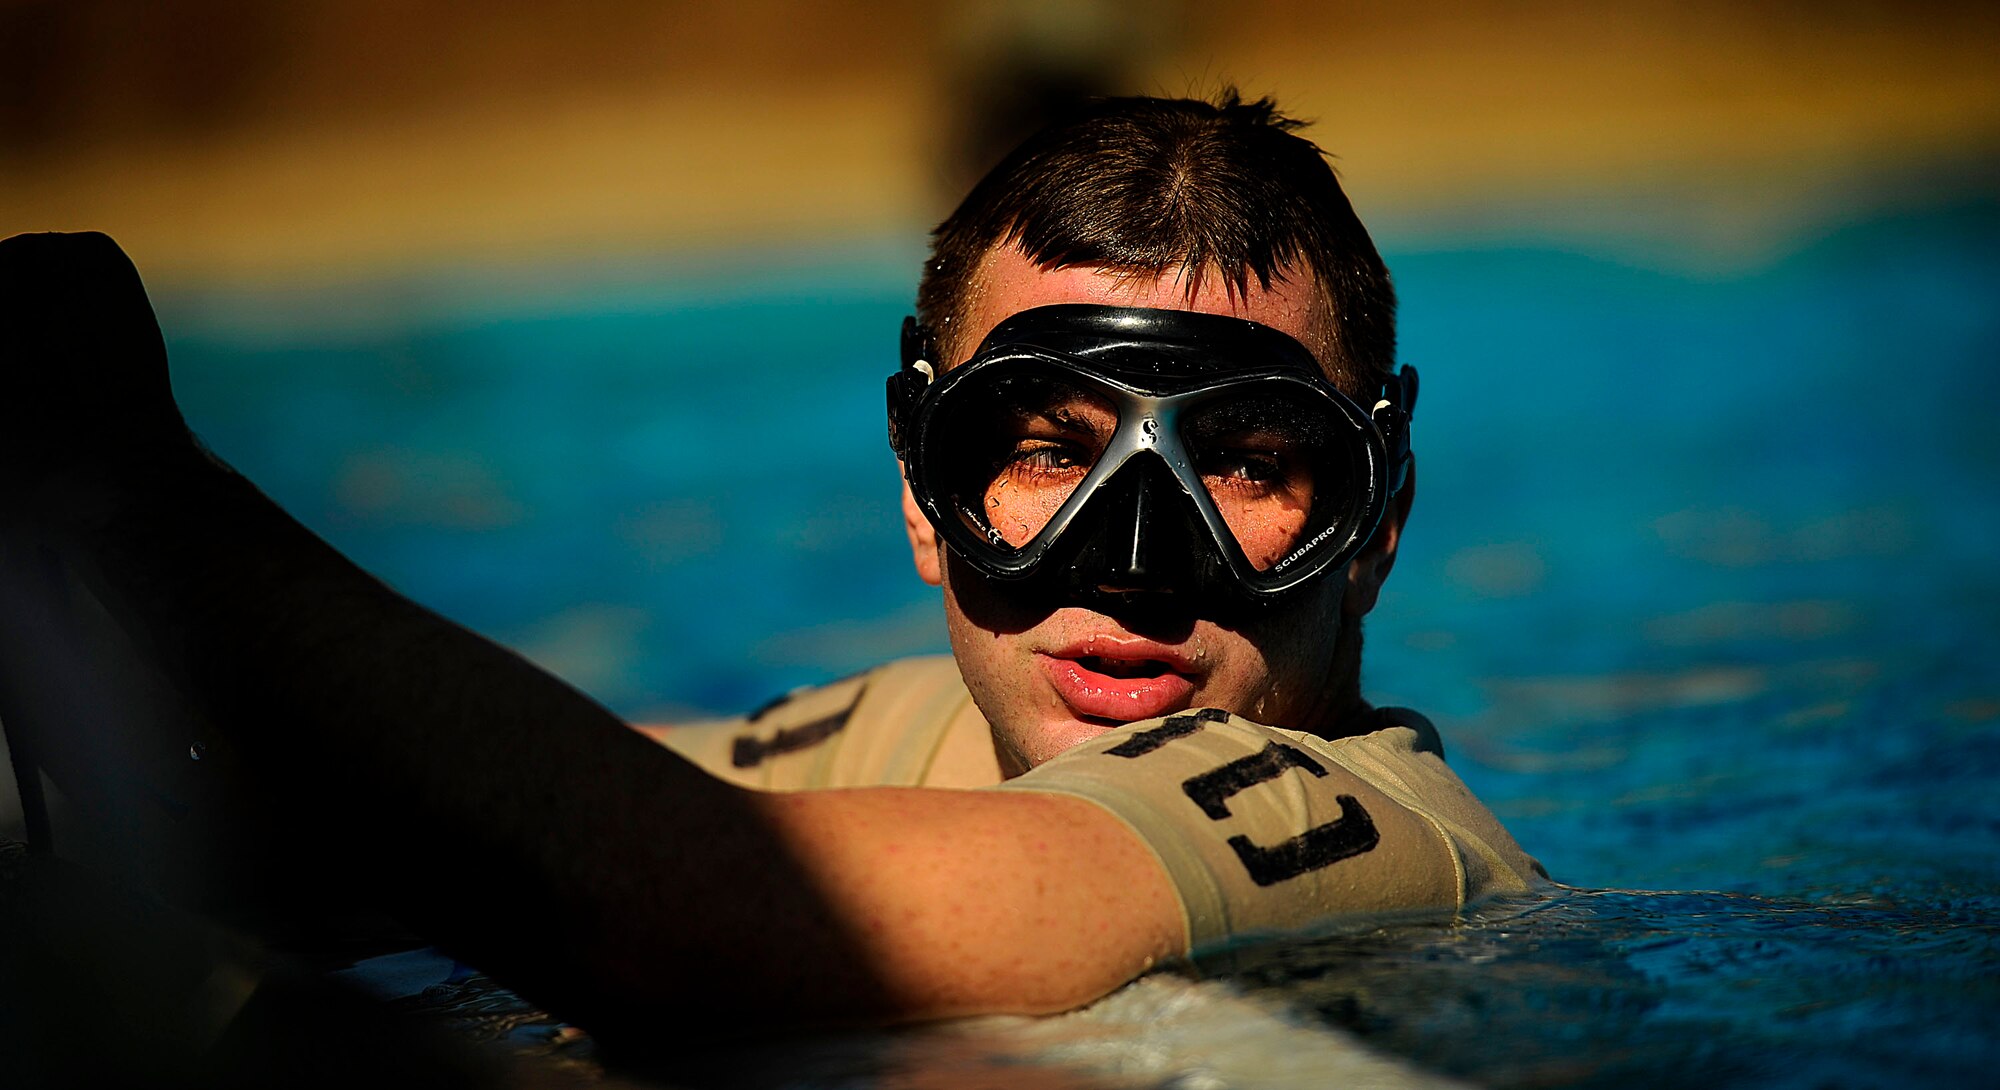 A U.S. Air Force member from the Special Tactics Training Squadron, Air Force Special Operations Command, Hurlburt Field, Fla., rests on the side of the pool during pre-scuba training Sept. 21, 2010. (U.S. Air Force Photo by Master Sgt. Russell E Cooley IV/Released)